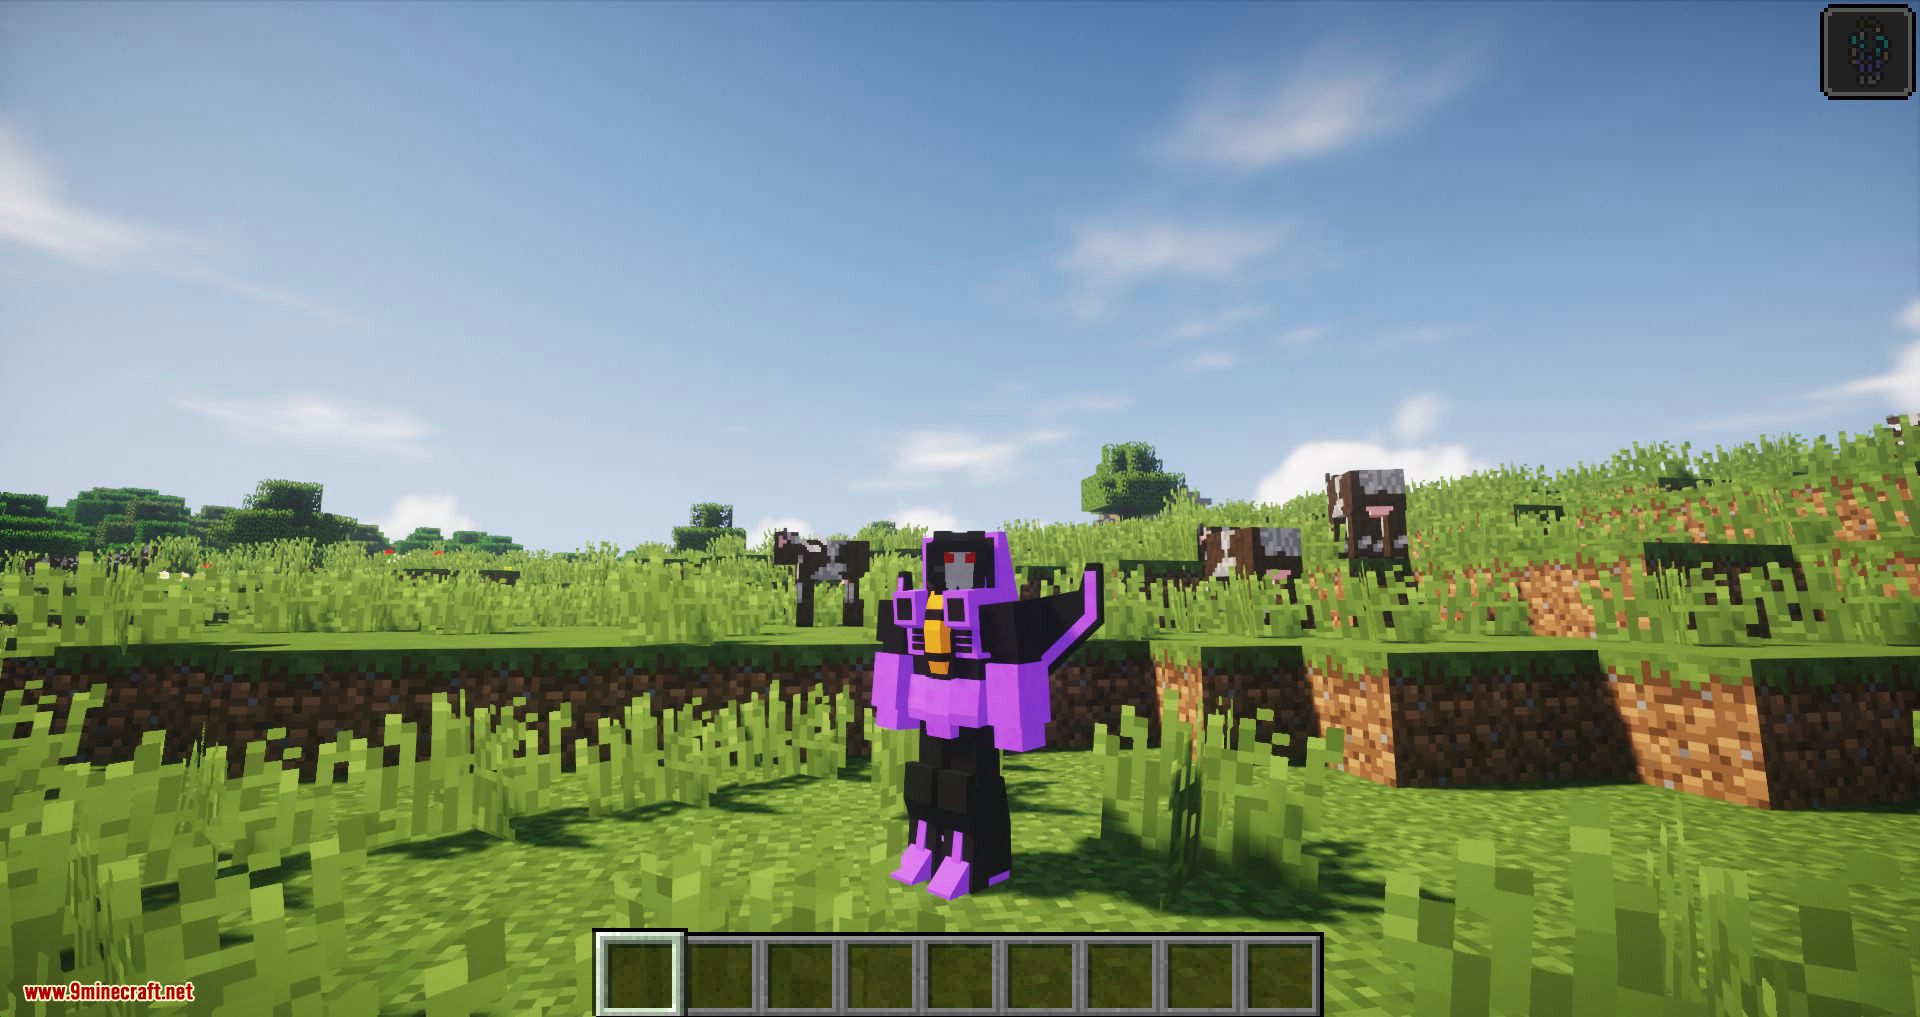 Transformers Unlimited Mod 1.12.2 (Transform Your Minecraft Experience) 8